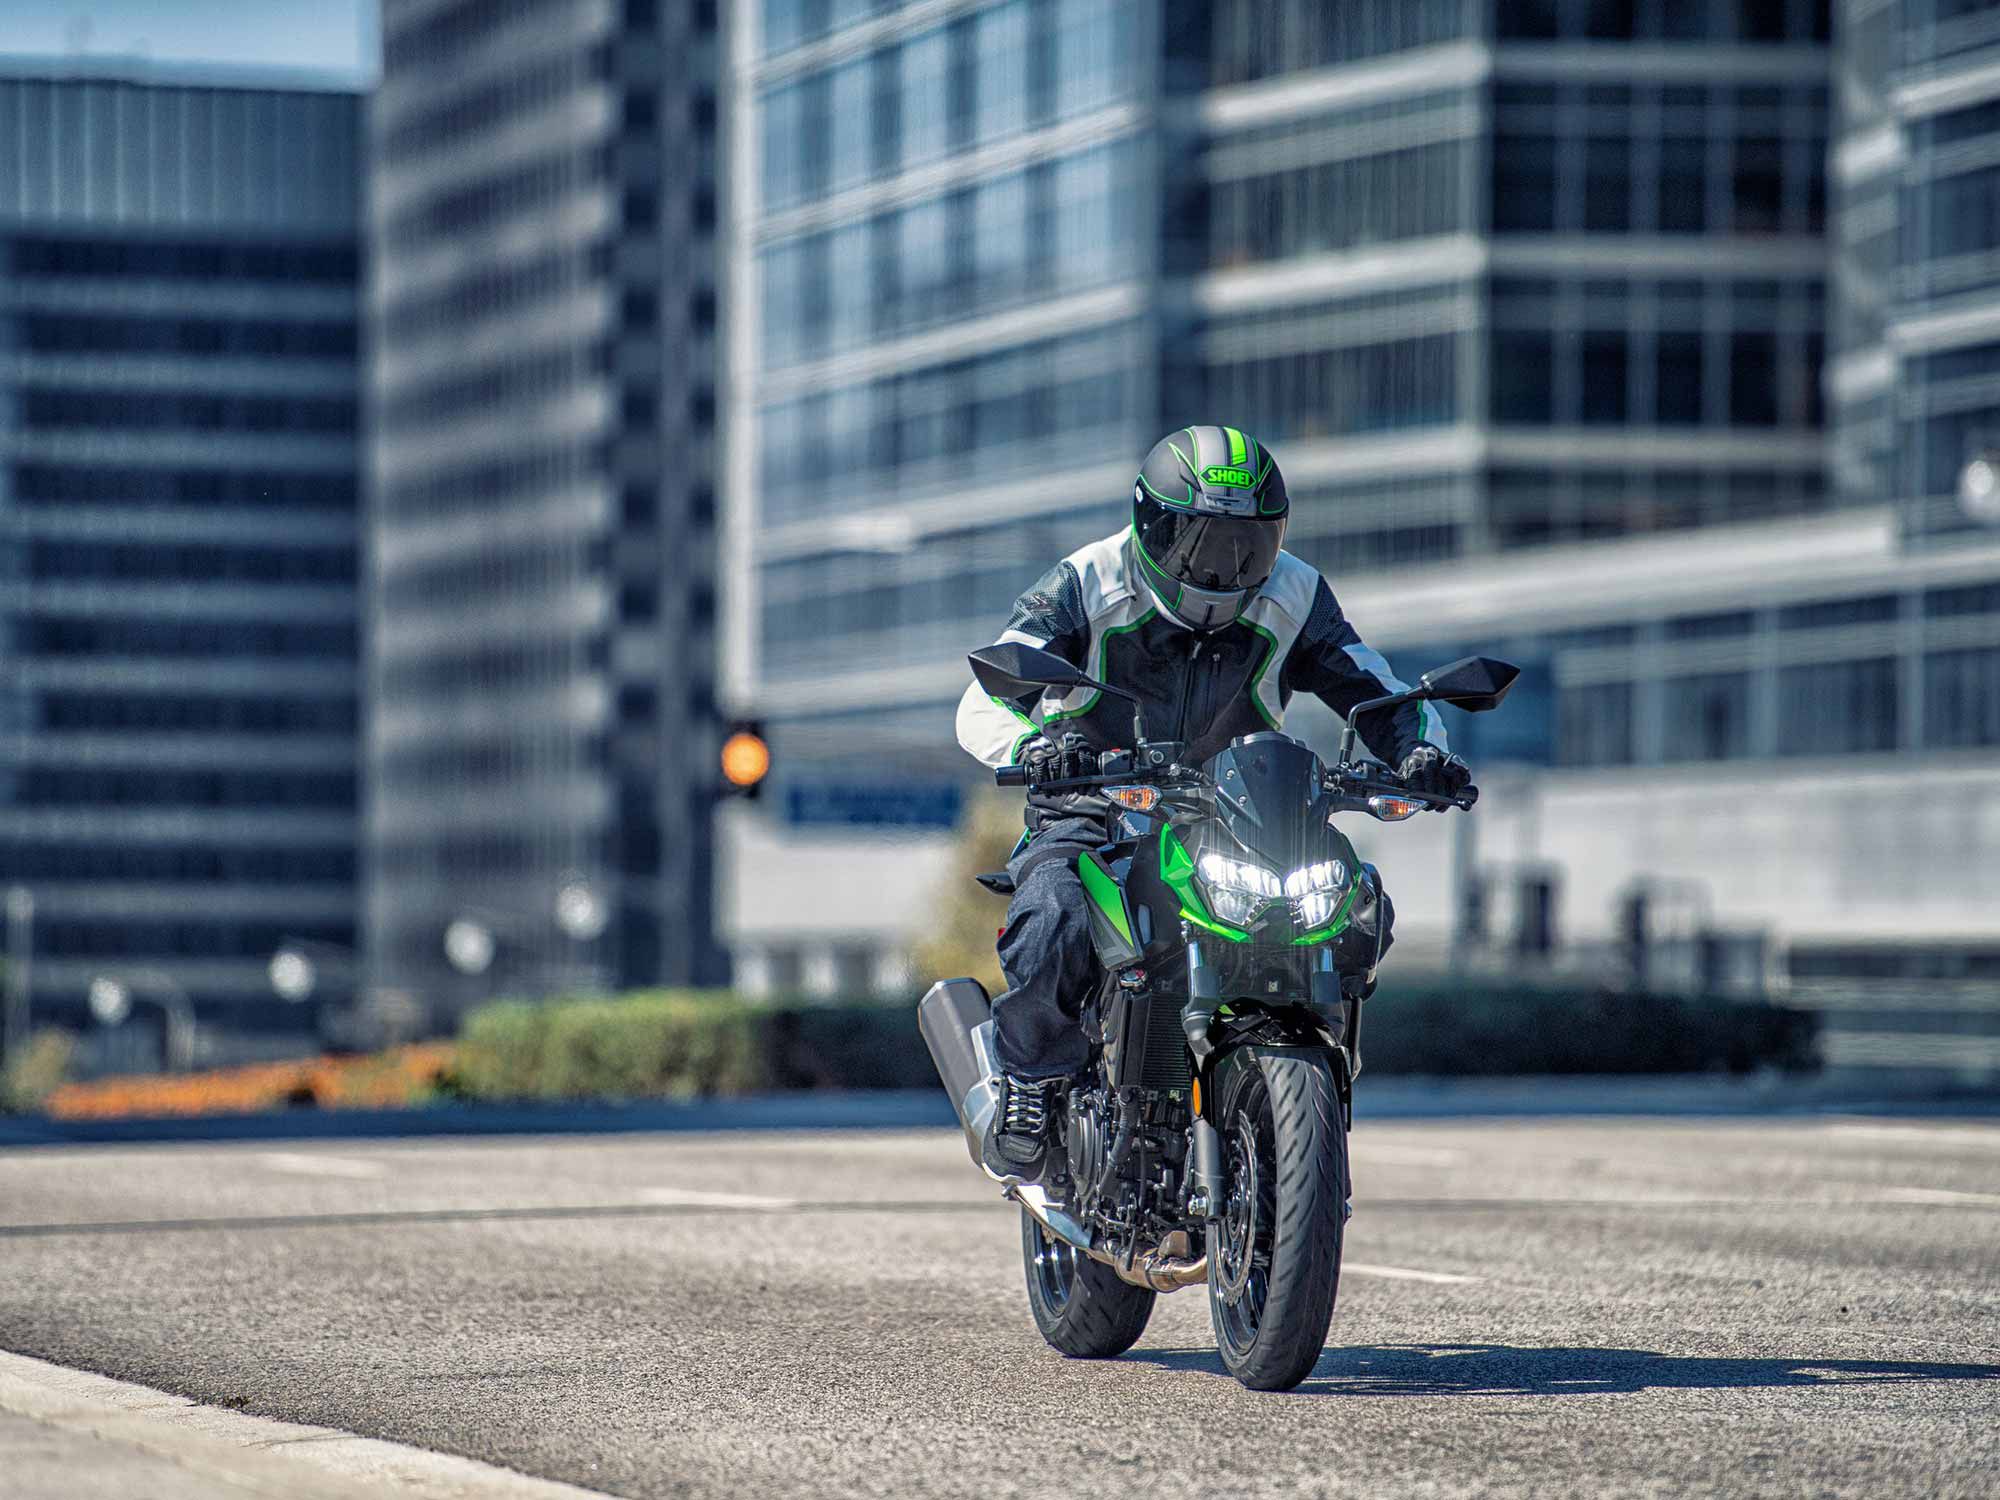 Aggressive in style, but not so aggressive in ergonomics. On the Z, riders will have a more upright riding posture than if they opted for the Ninja 400.